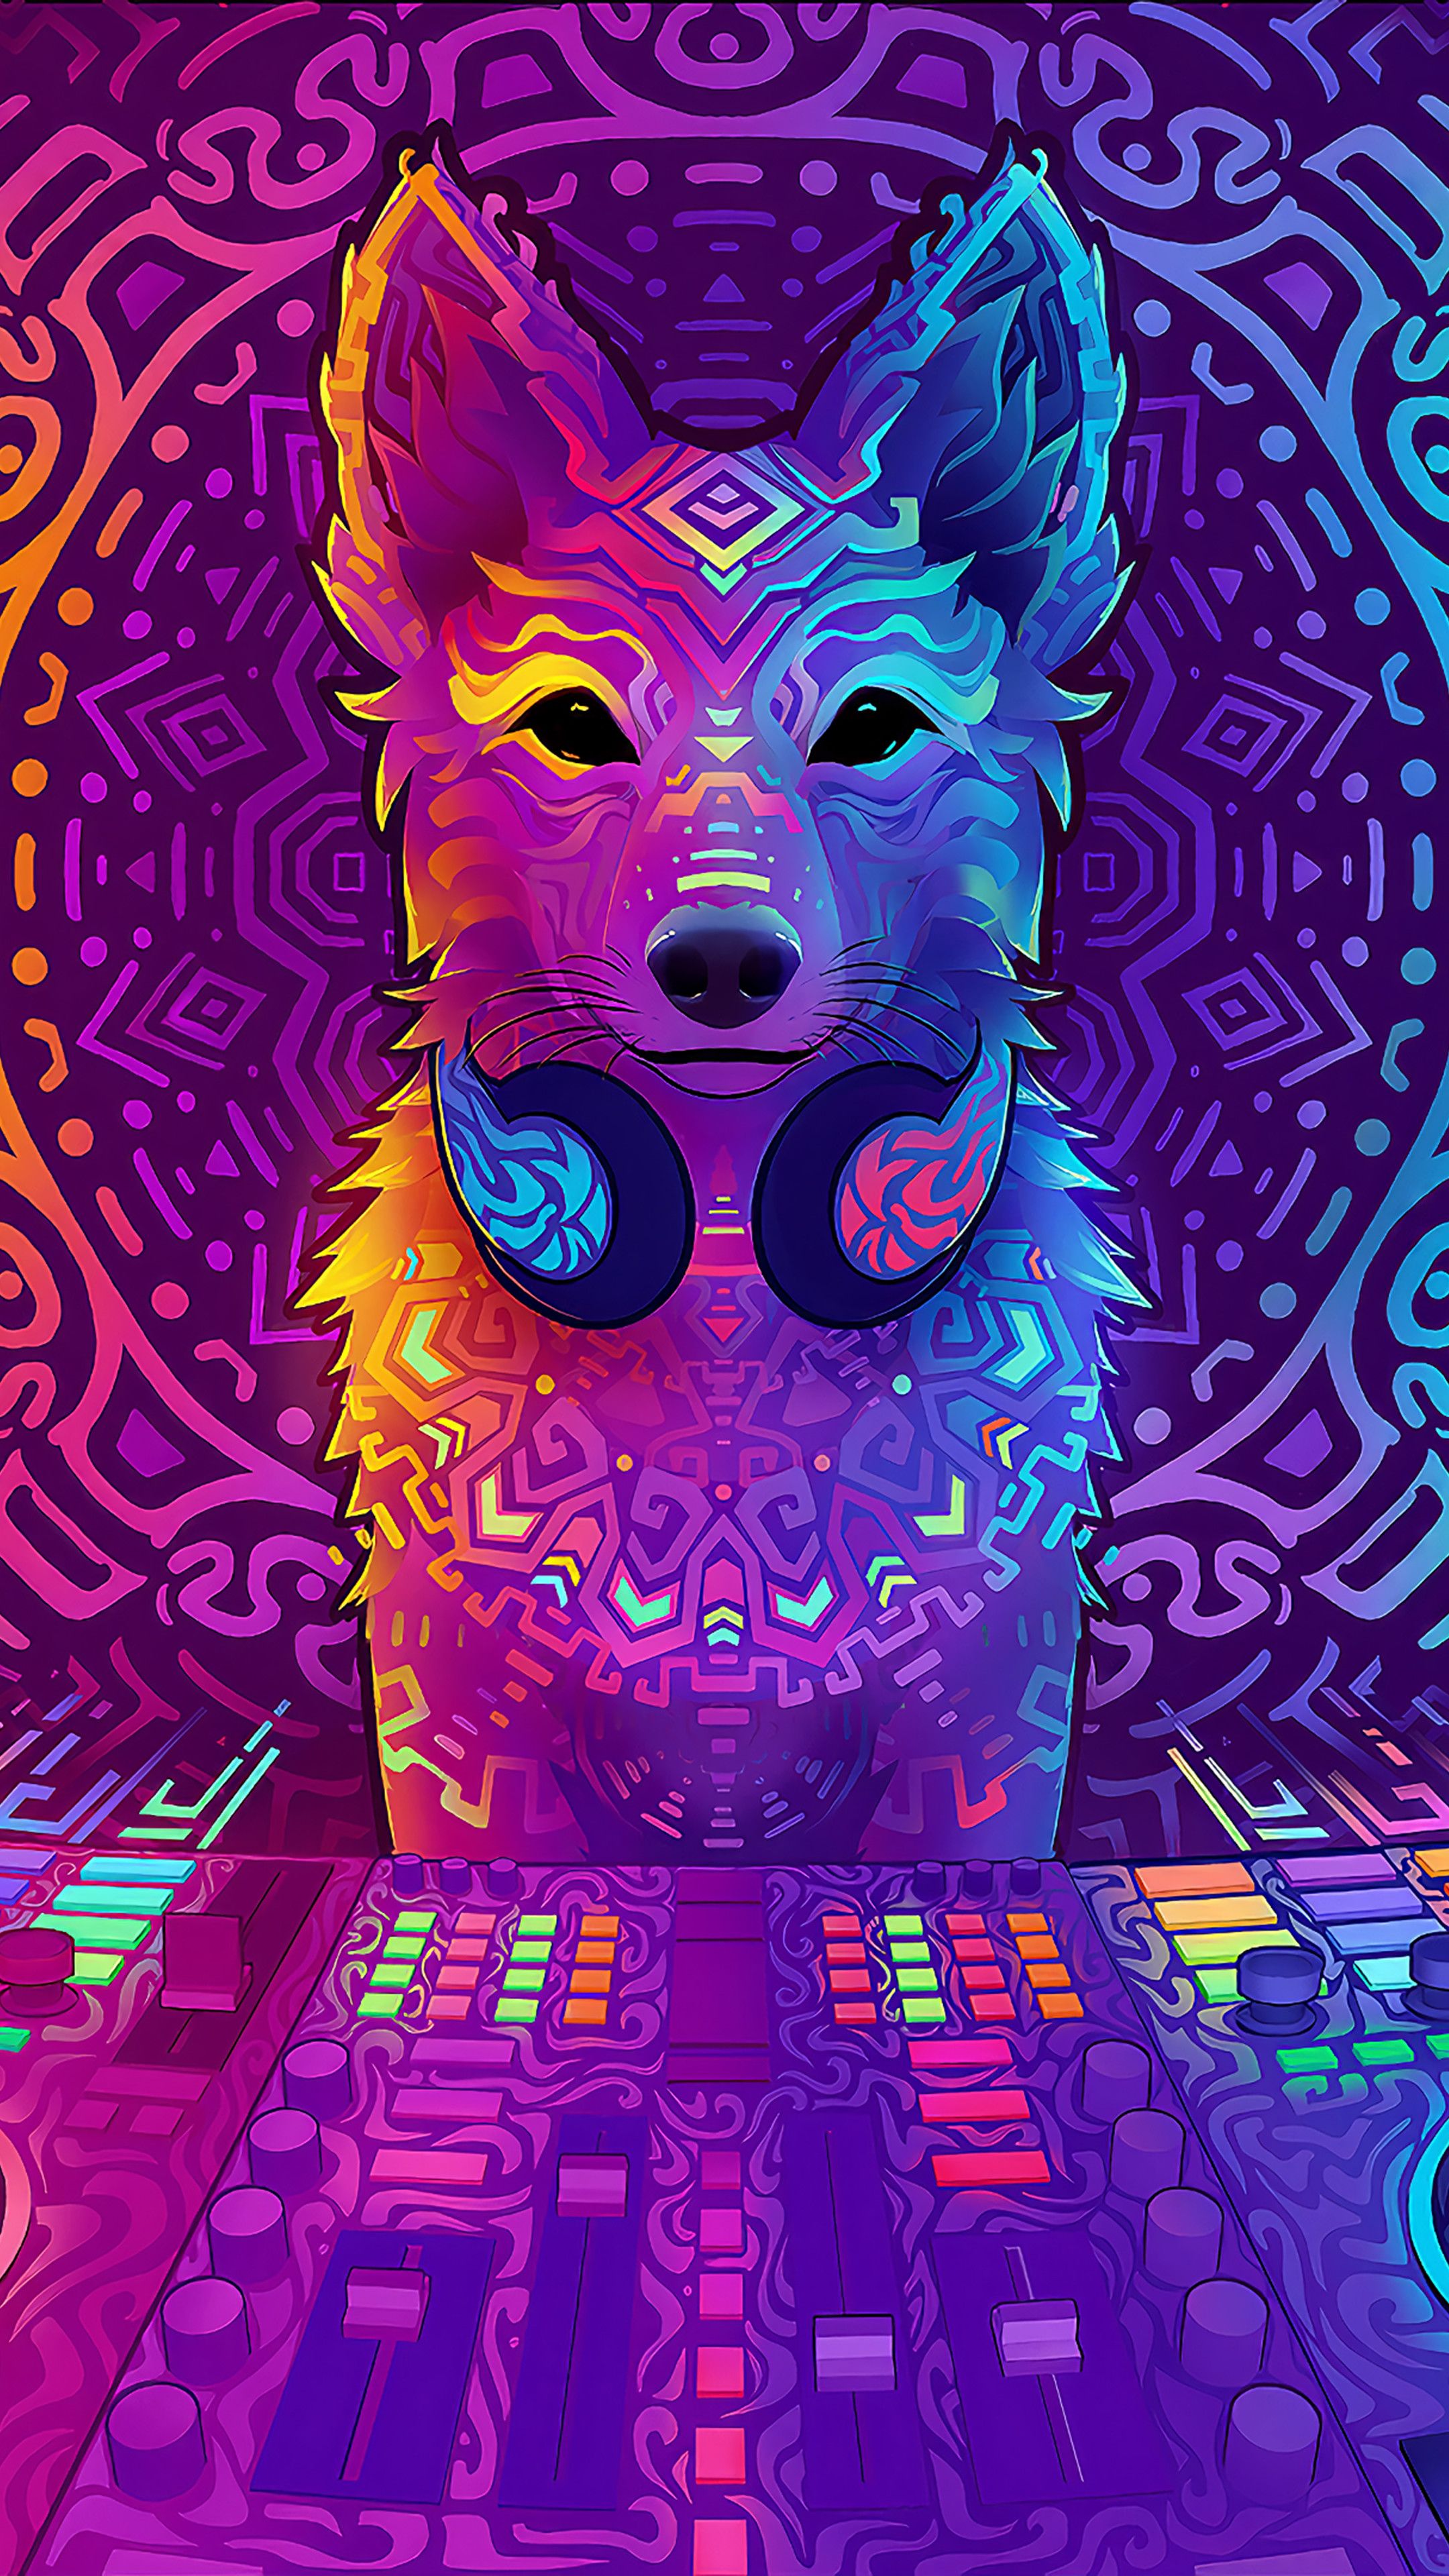 Smartphone Wallpaper 4K Abstract / Dj Digital Art Dog Abstract 4k Wallpaper 68 / We hope you enjoy our growing collection of HD image to use as a background or home screen